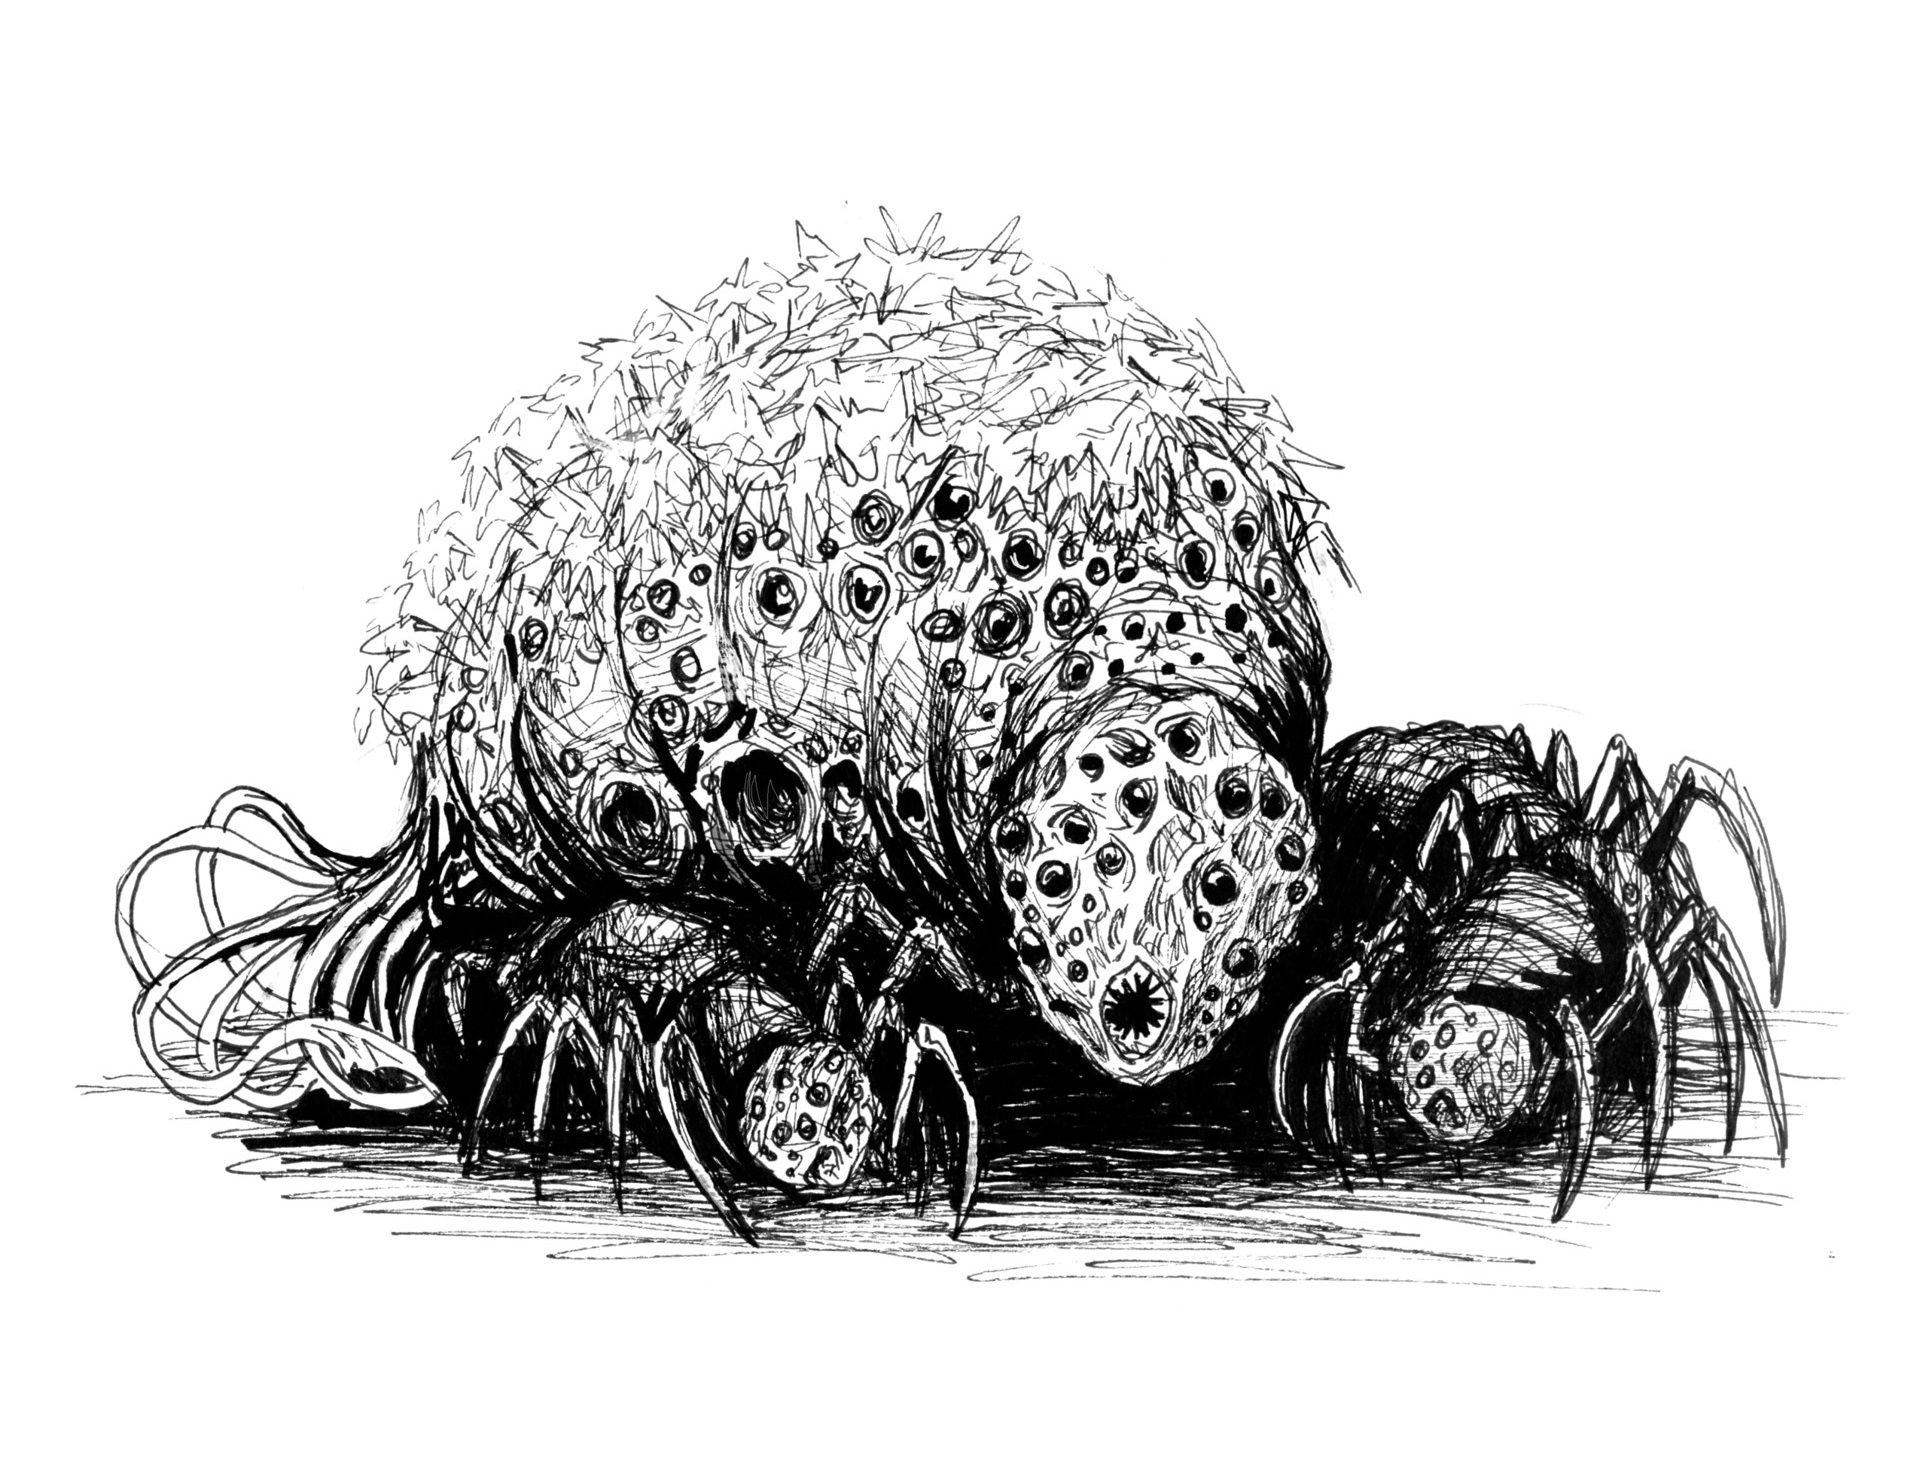 Bloodborne: 10 Pieces Of Rom The Vacuous Spider Fan Art That Are Horrifying